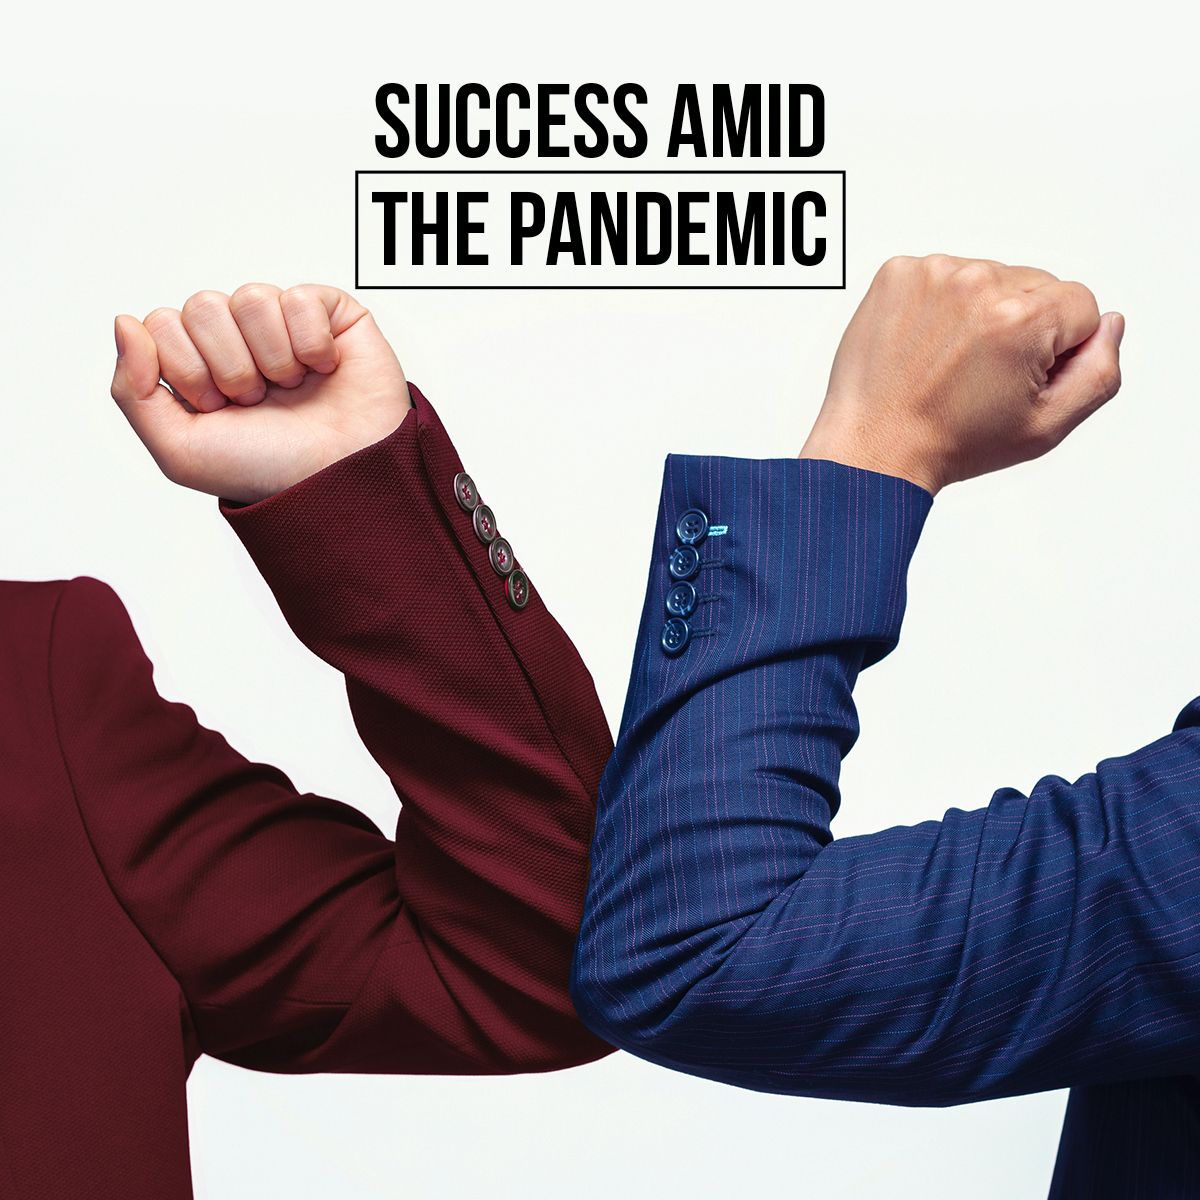 success amid the pandemic